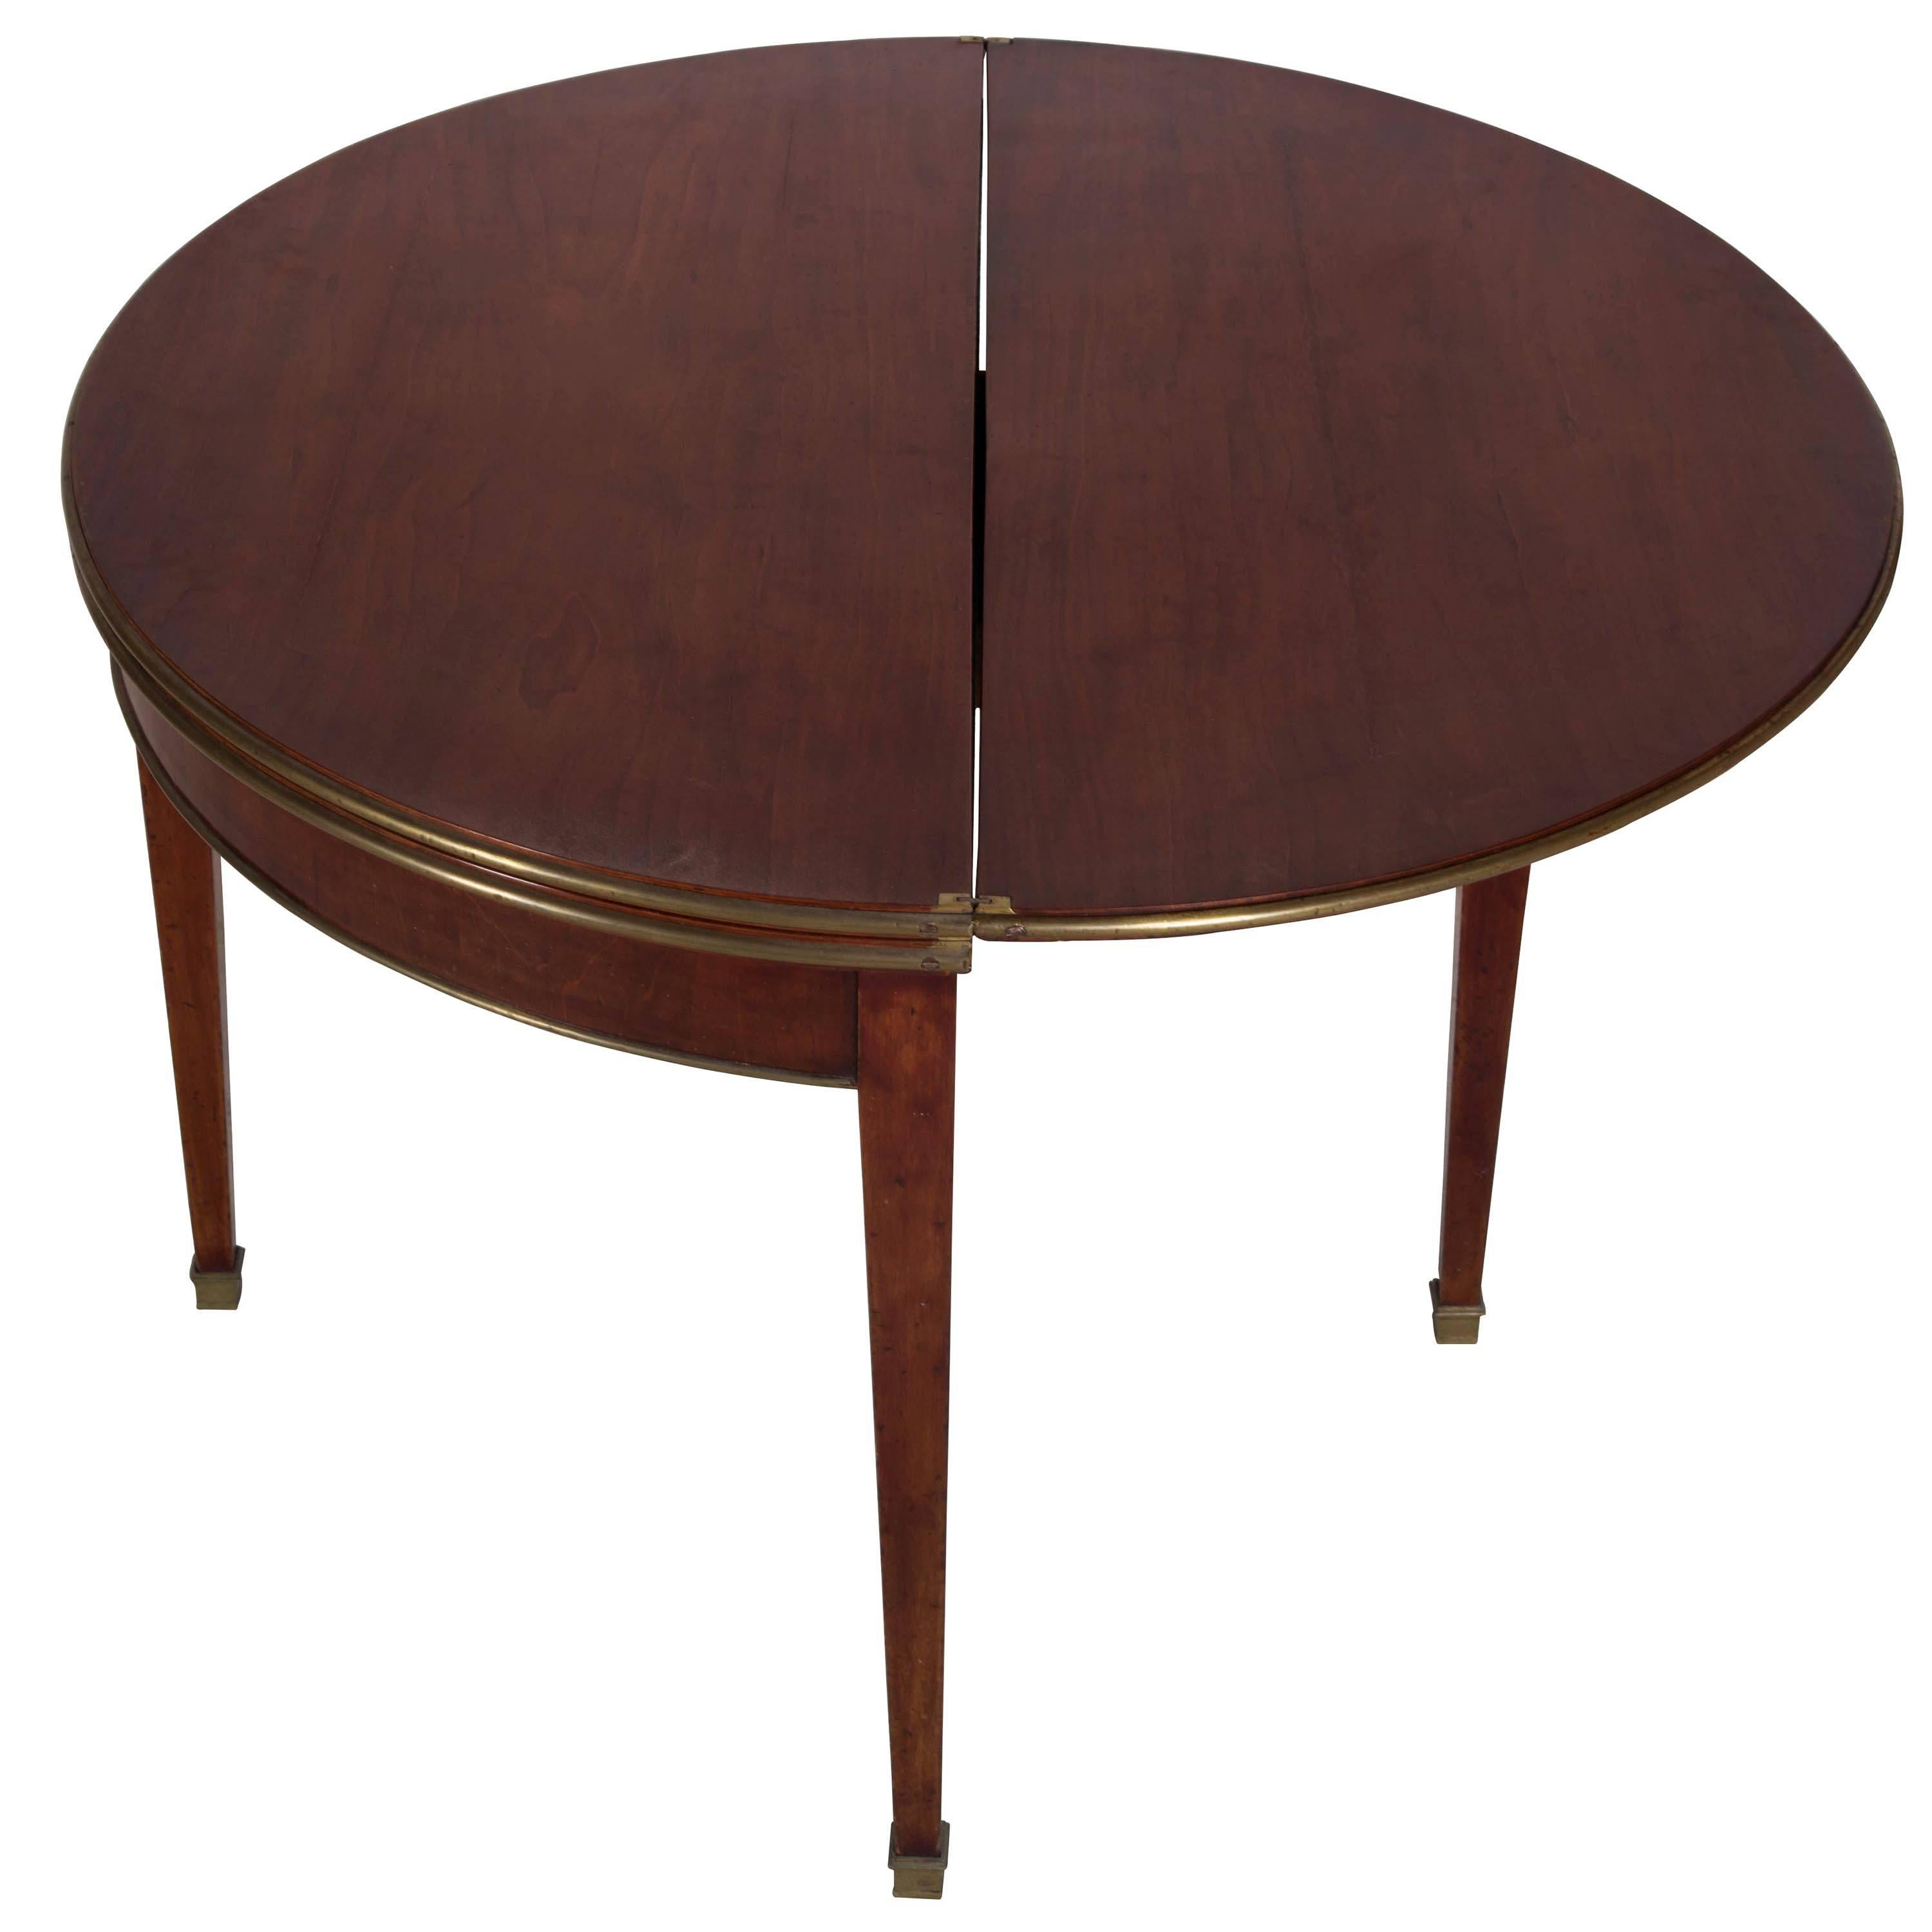 Fine English dual topped baized card table and occasional table with brass detail.